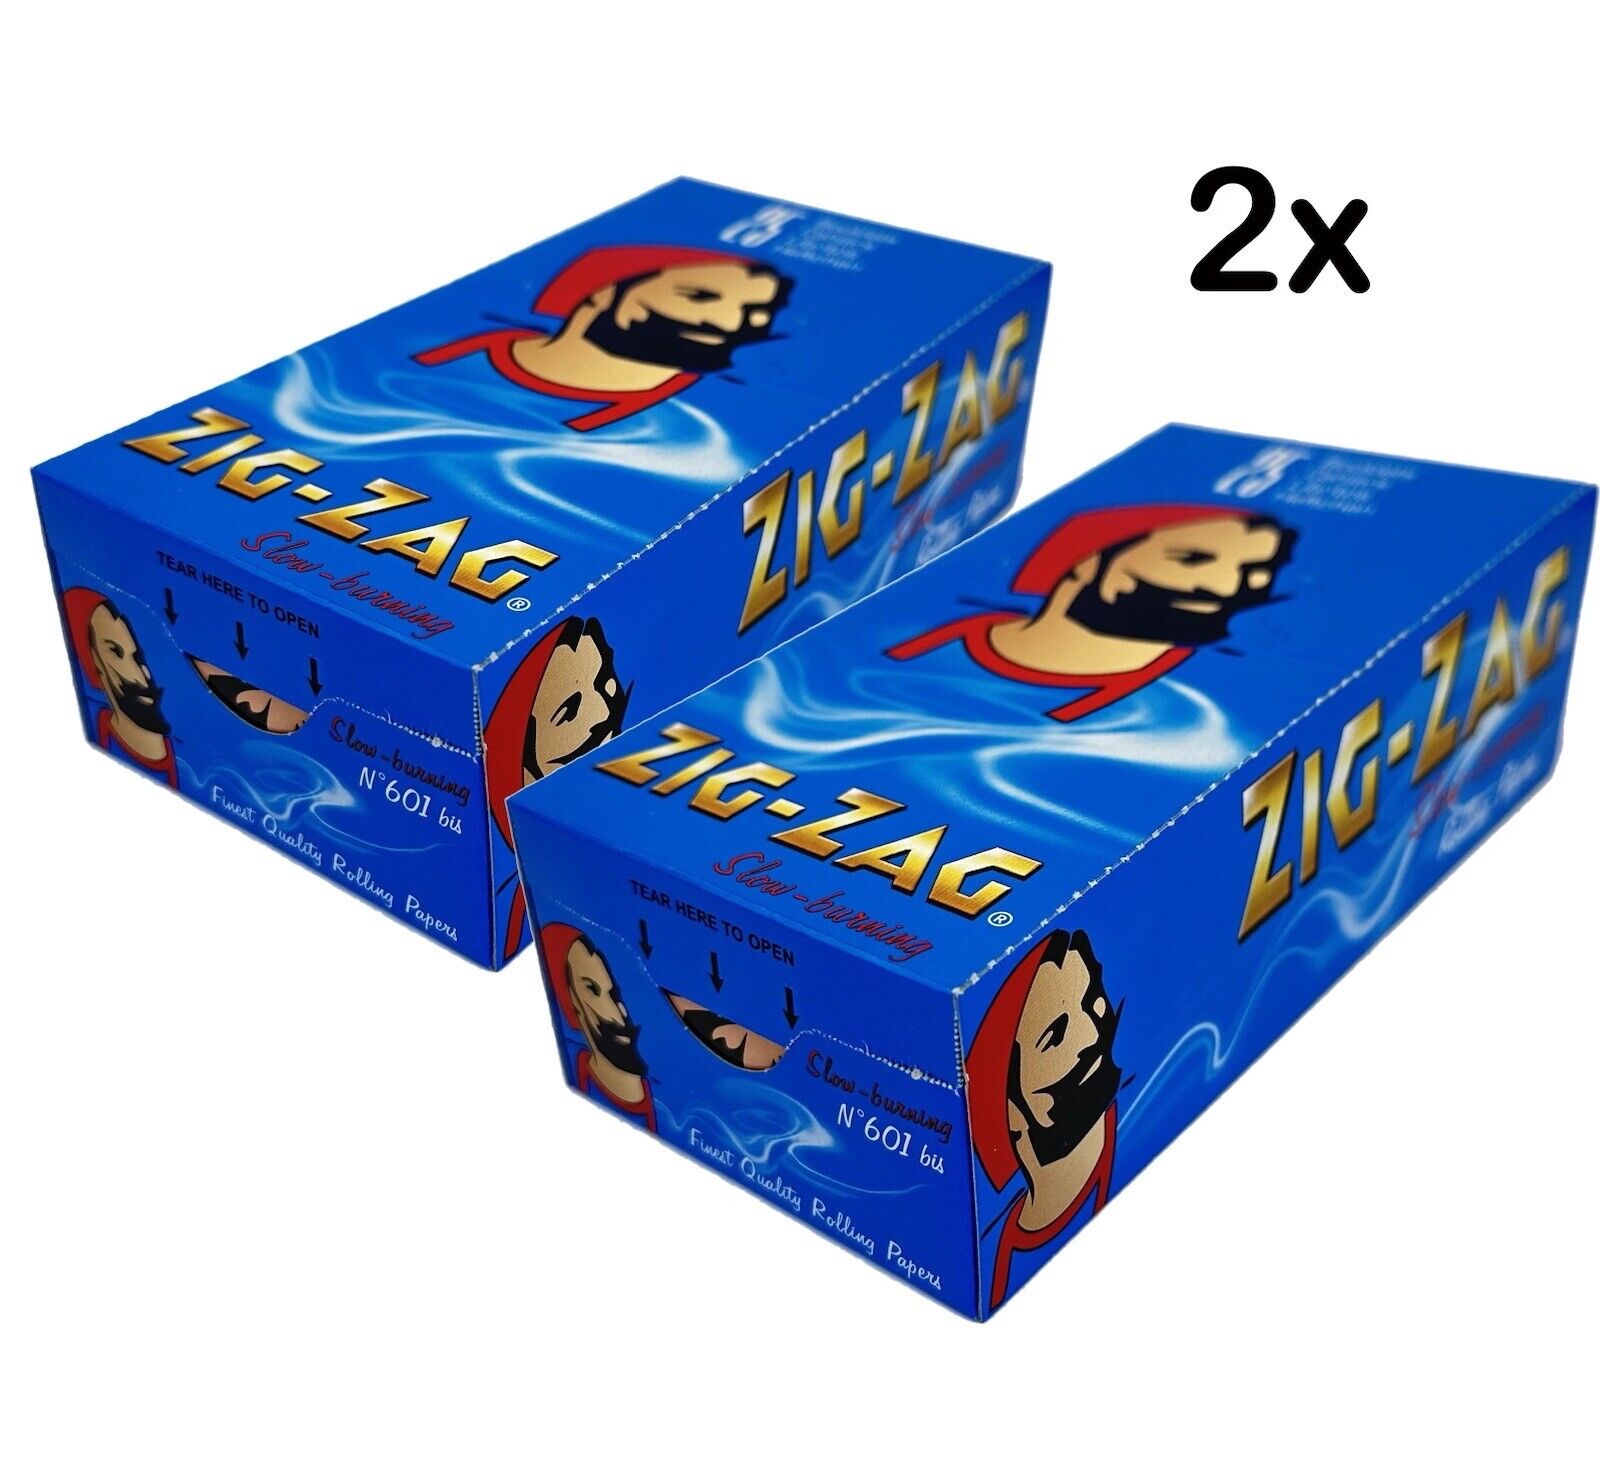 2 X Box Blue Double 25pack Zig Zag Rolling Paper Total 50x Double 